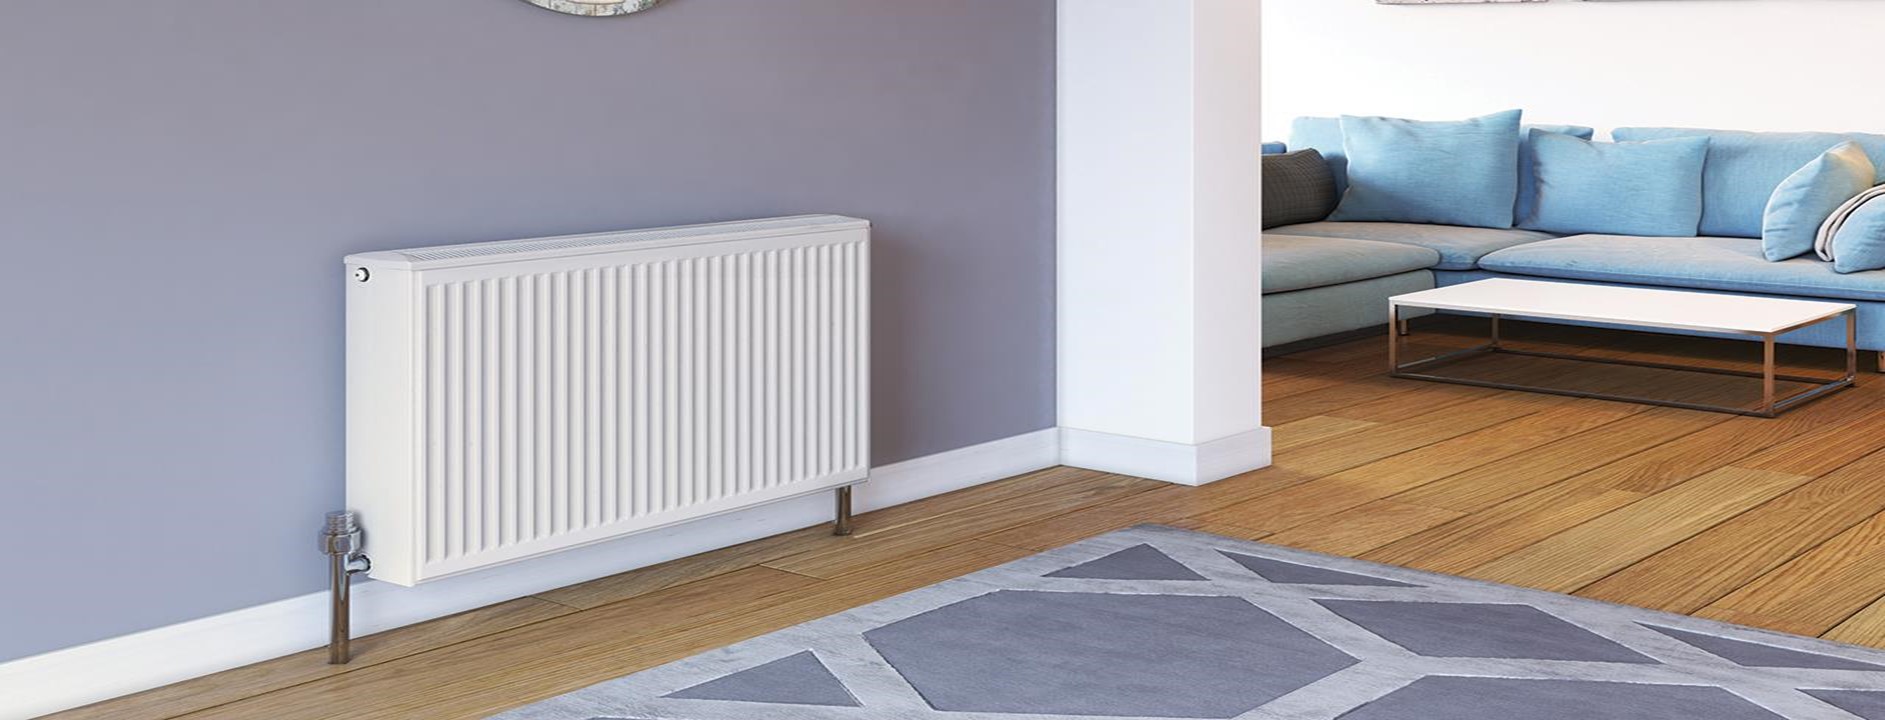 How to remove a radiator for decorating 